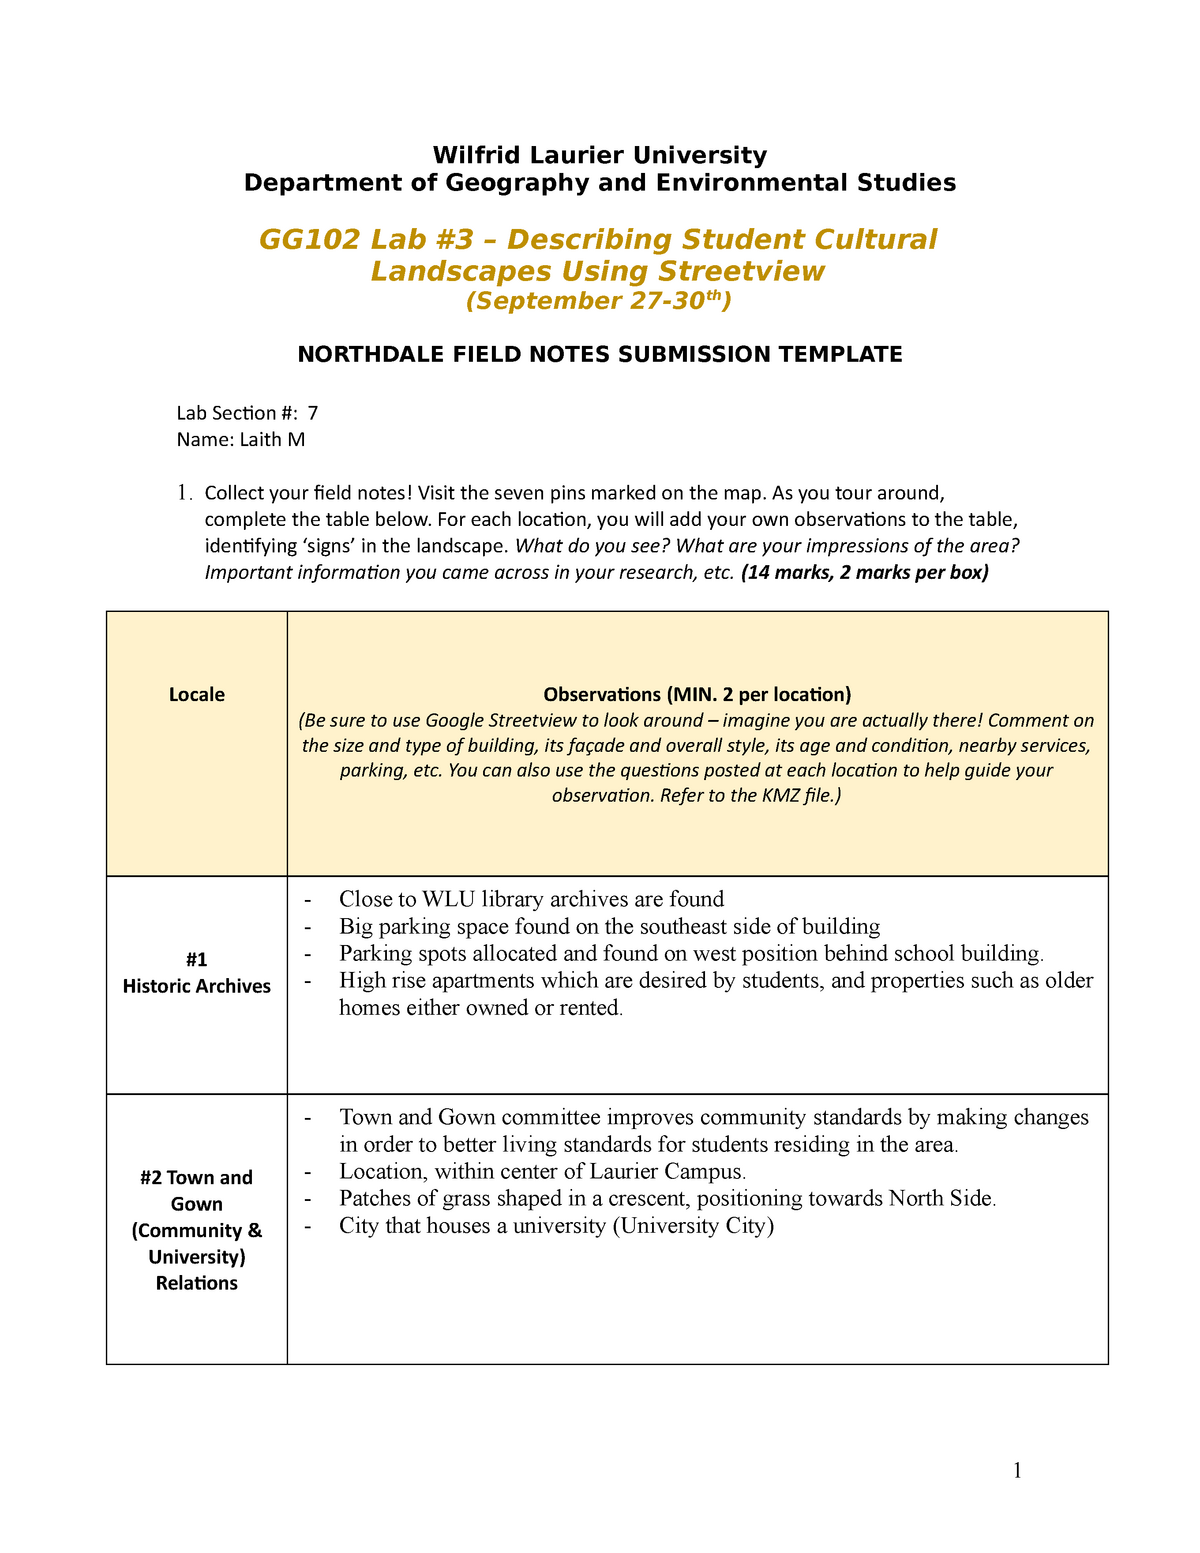 GG223 Lab #23 Submission Template - Wilfrid Laurier University Pertaining To Observation Field Notes Template